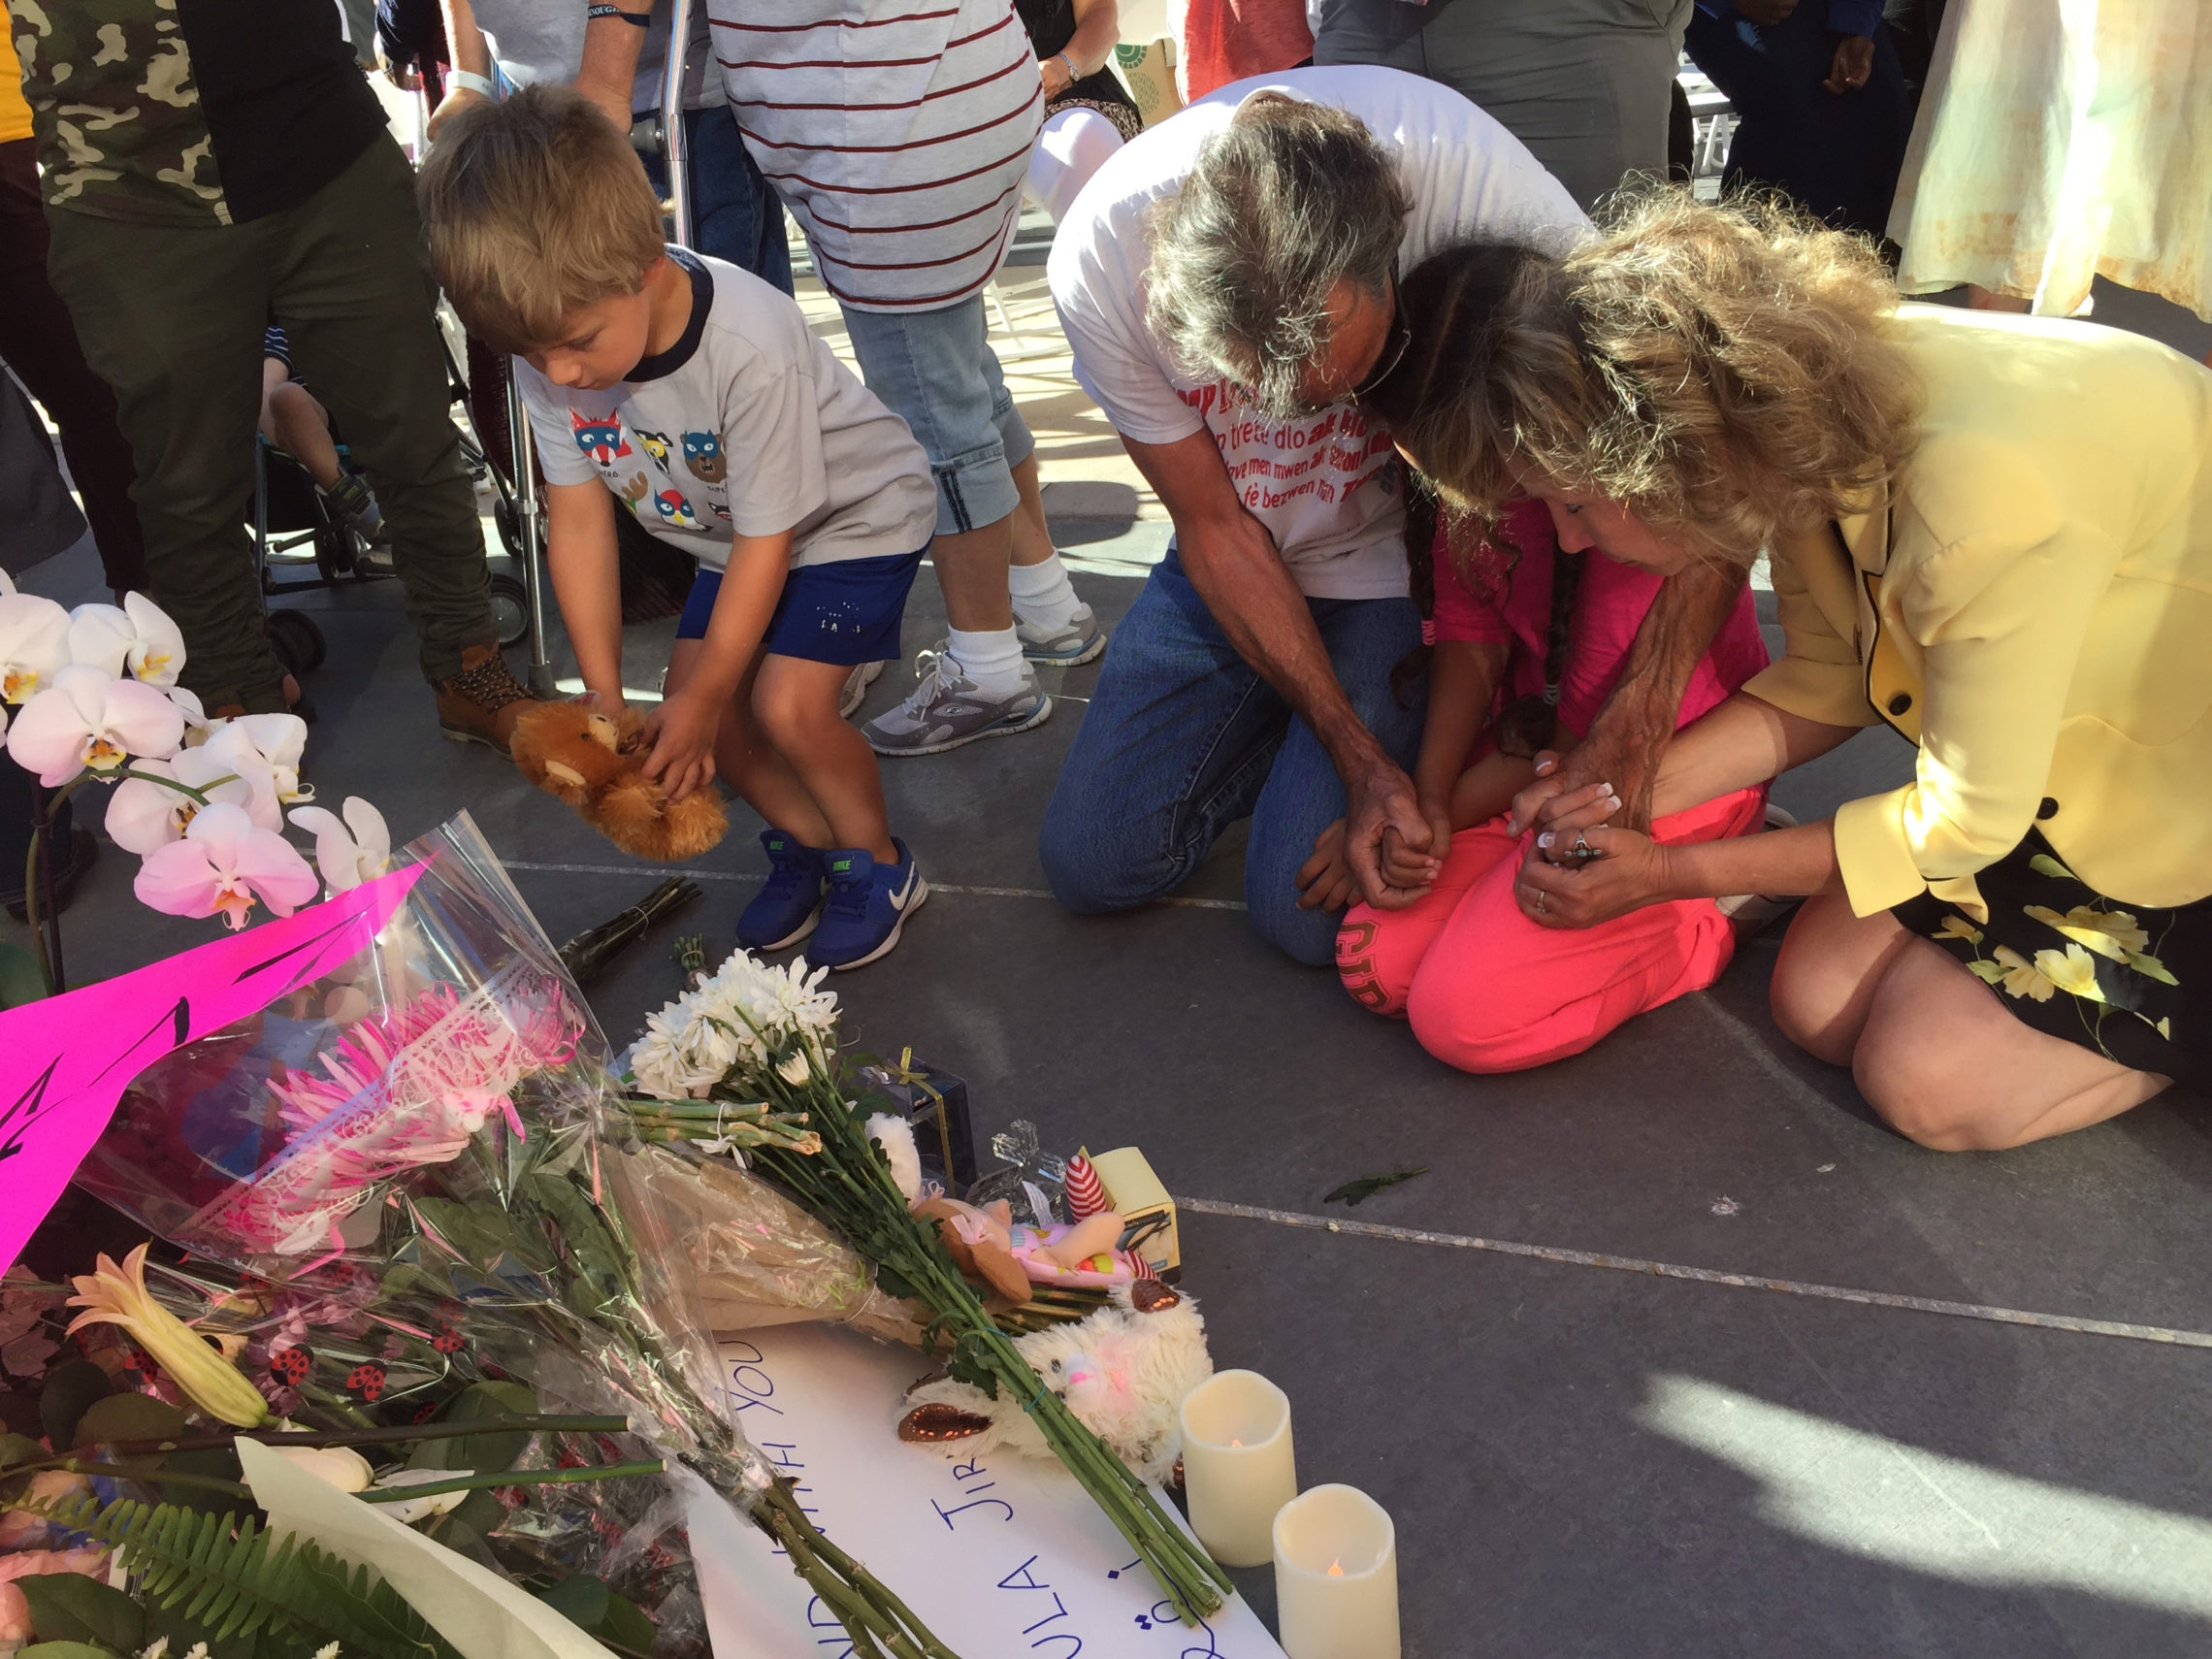 A boy places a stuffed animal as other people kneel at a memorial during a vigil at City Hall in Boise, Idaho, Monday, July 2, 2018. A 3-year-old Idaho girl who was stabbed at her birthday party died Monday, two days after a man invaded the celebration and attacked nine people with a knife, authorities said. AP Photo/Rebecca Boone